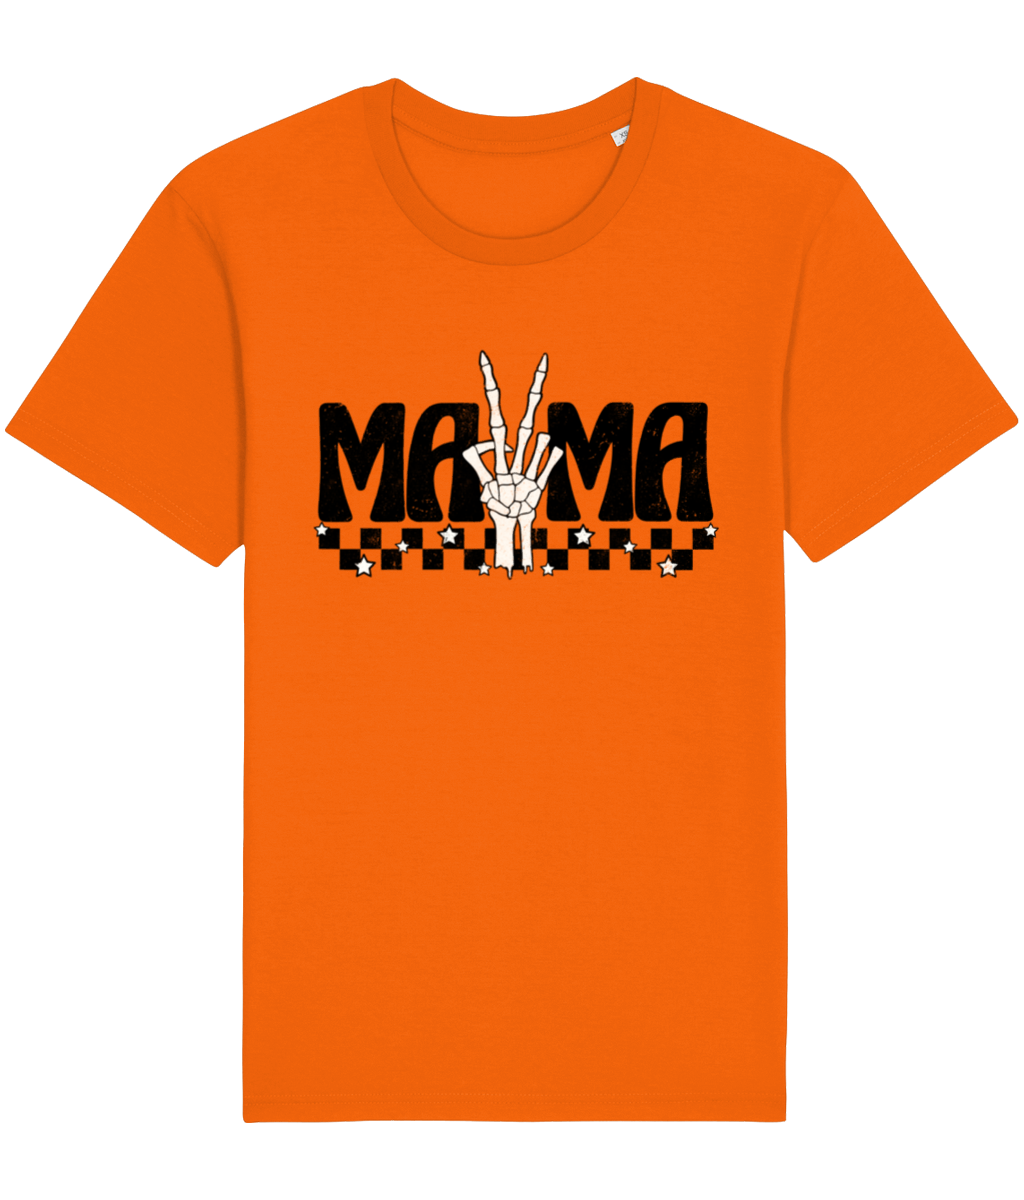 Rocker Mama Skeleton Tee - This t-shirt is available in both adult and mini versions!